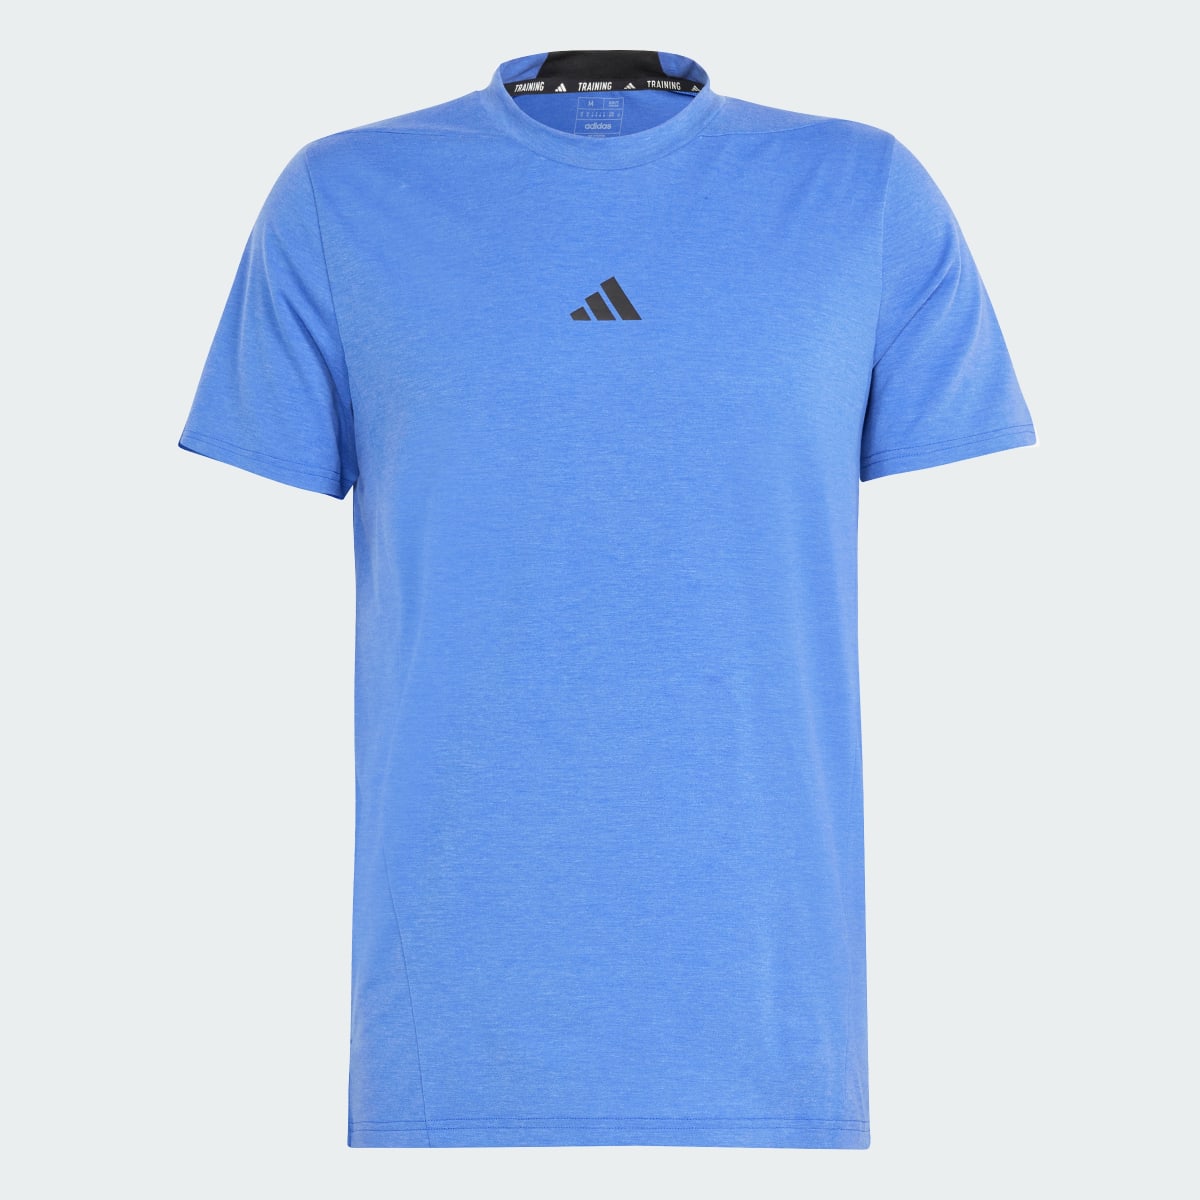 Adidas Designed for Training Workout Tee. 4